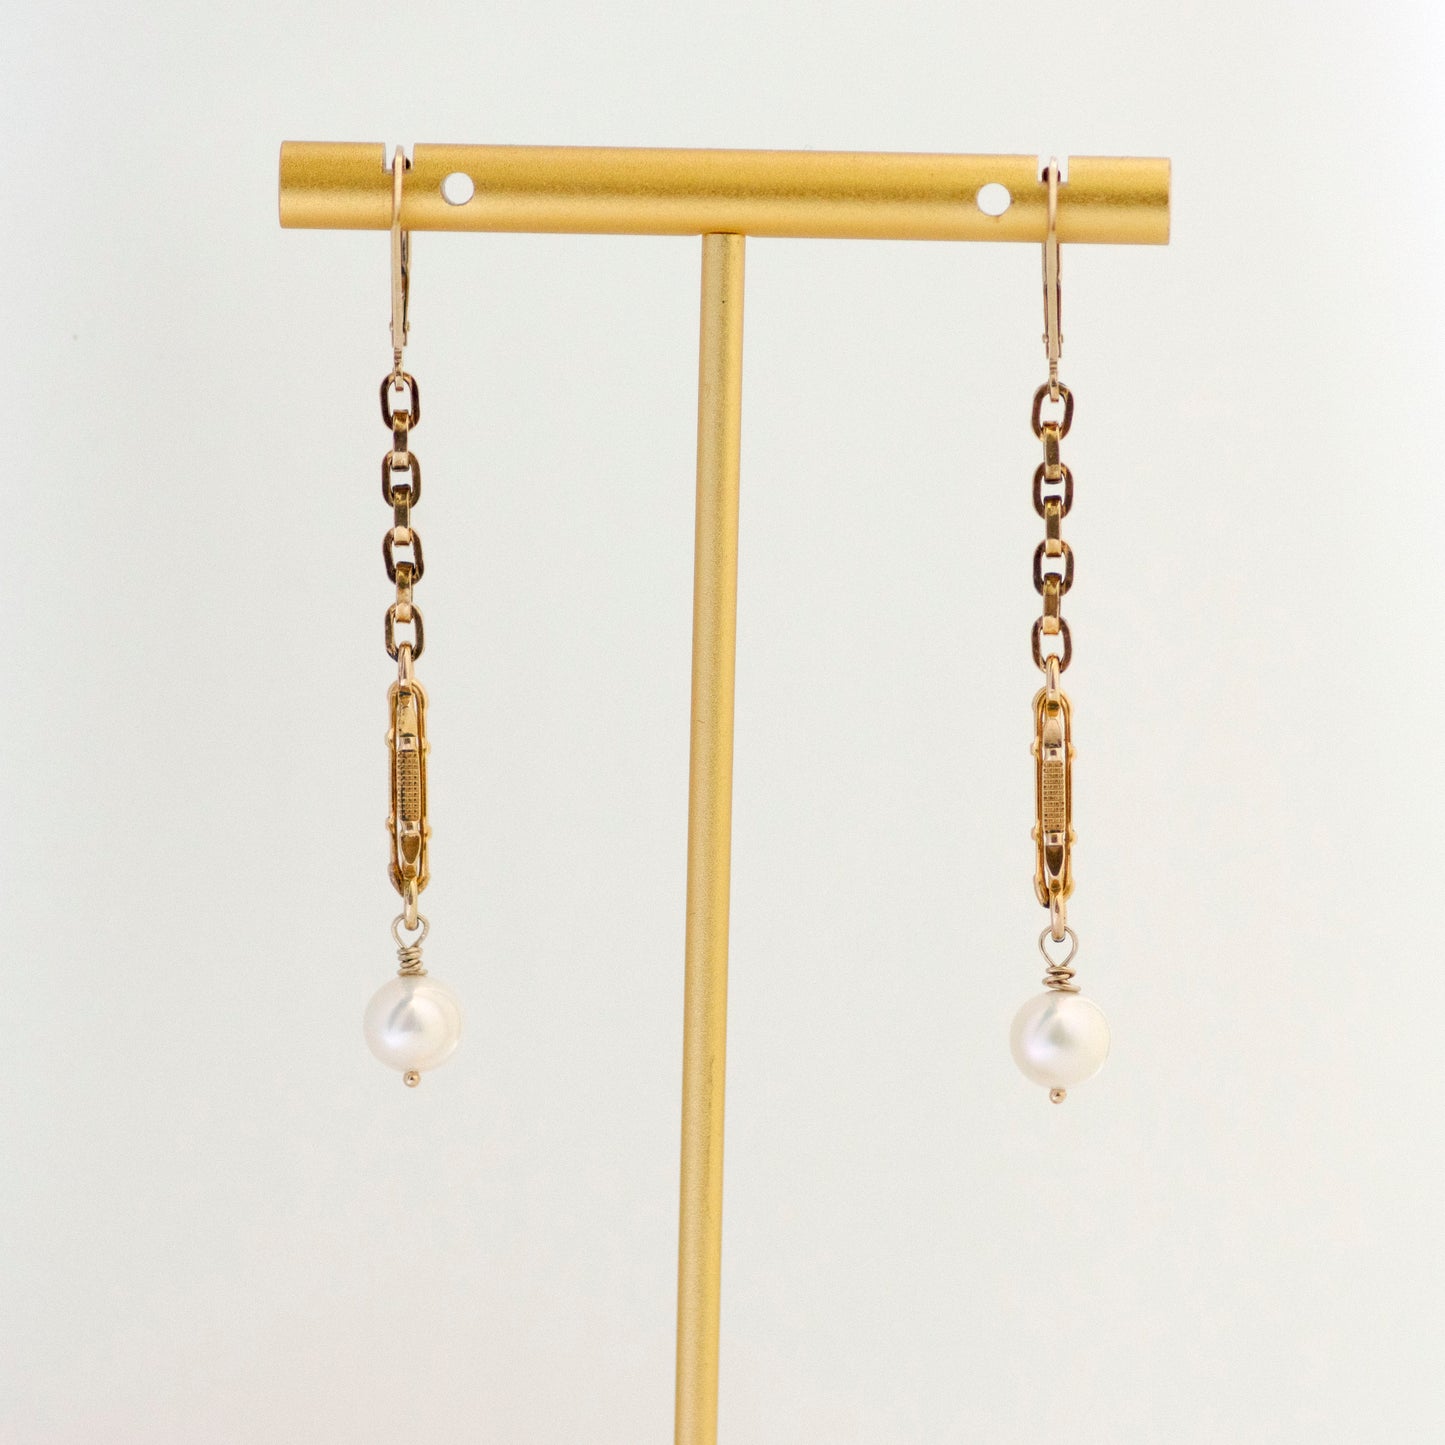 Long Dangling Pearl Drop Antique Watch Chain Earrings hanging on gold tone earring T stand.